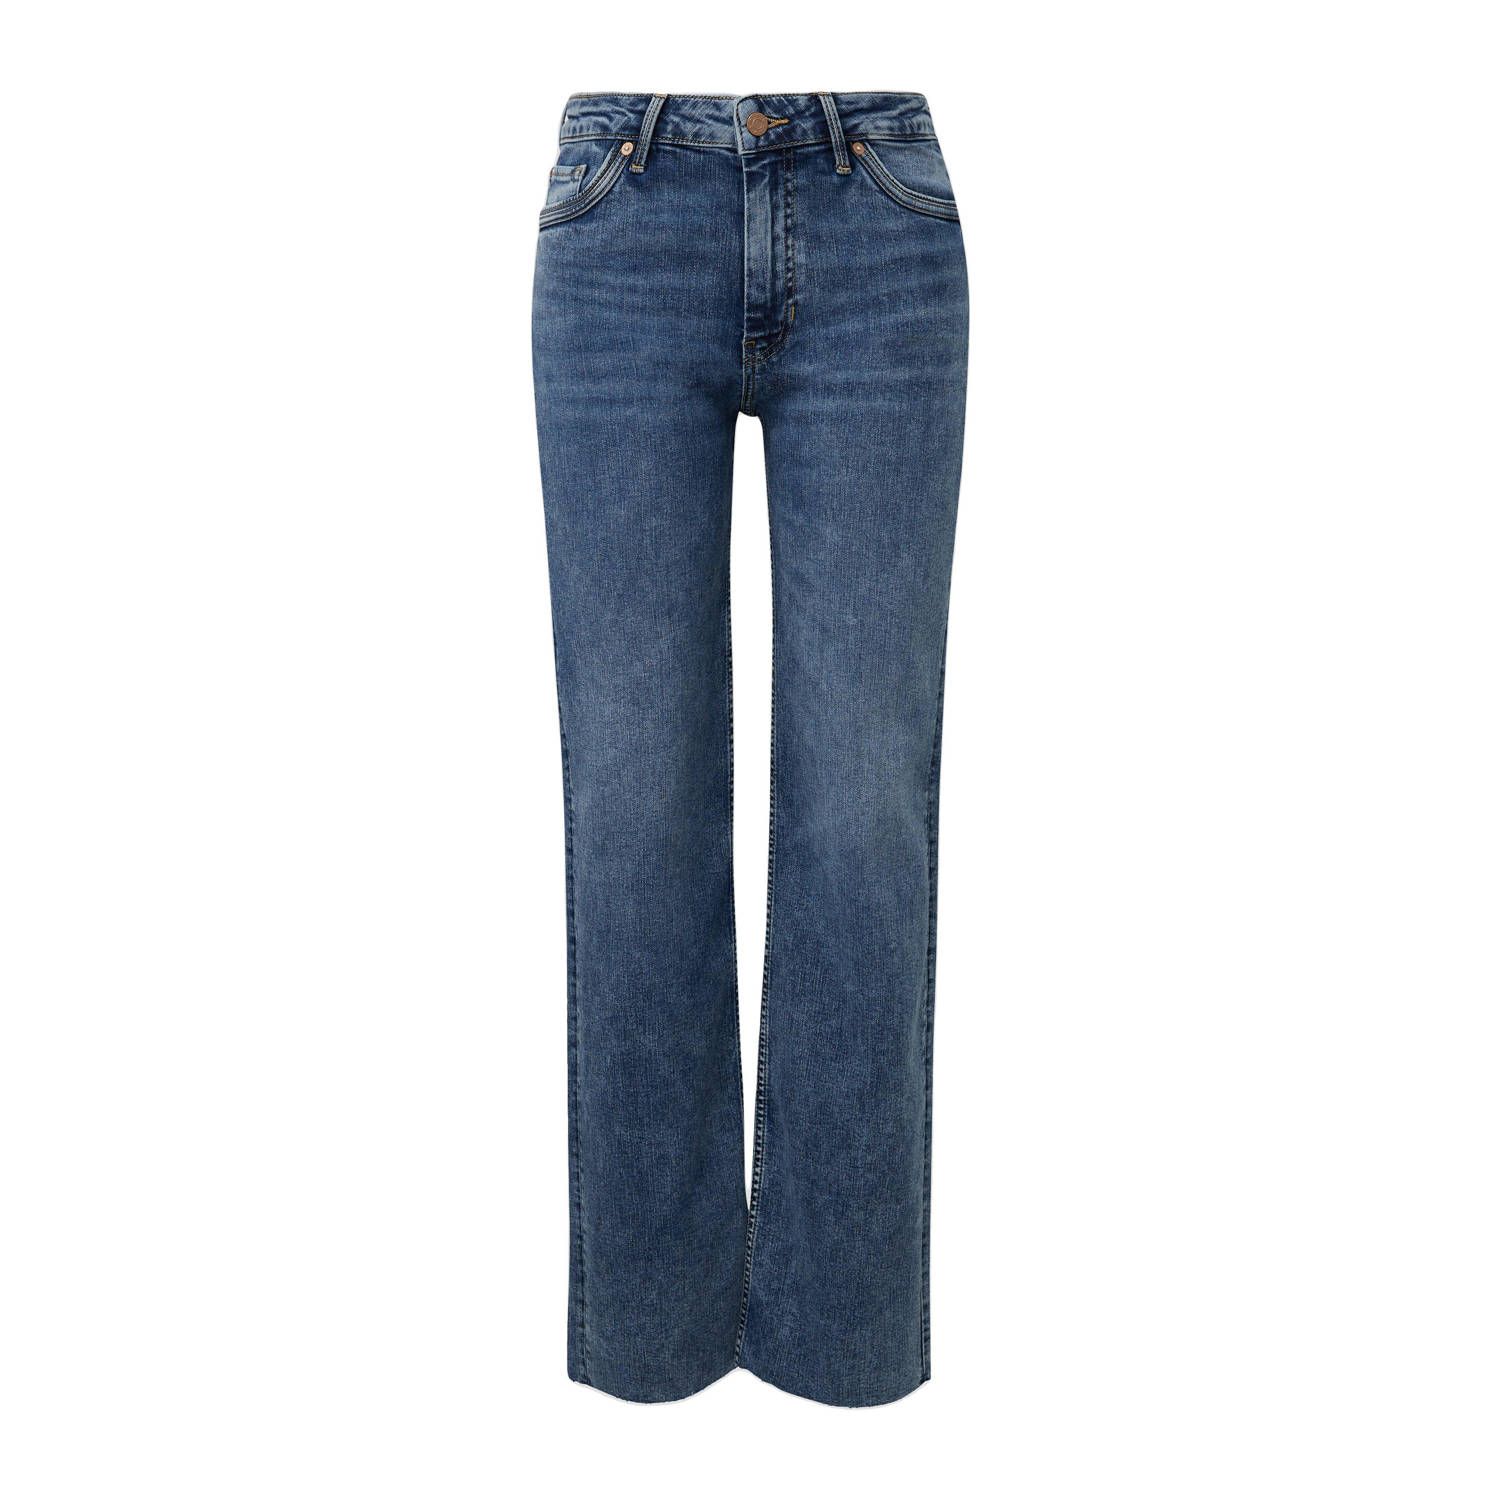 S.Oliver straight jeans blue